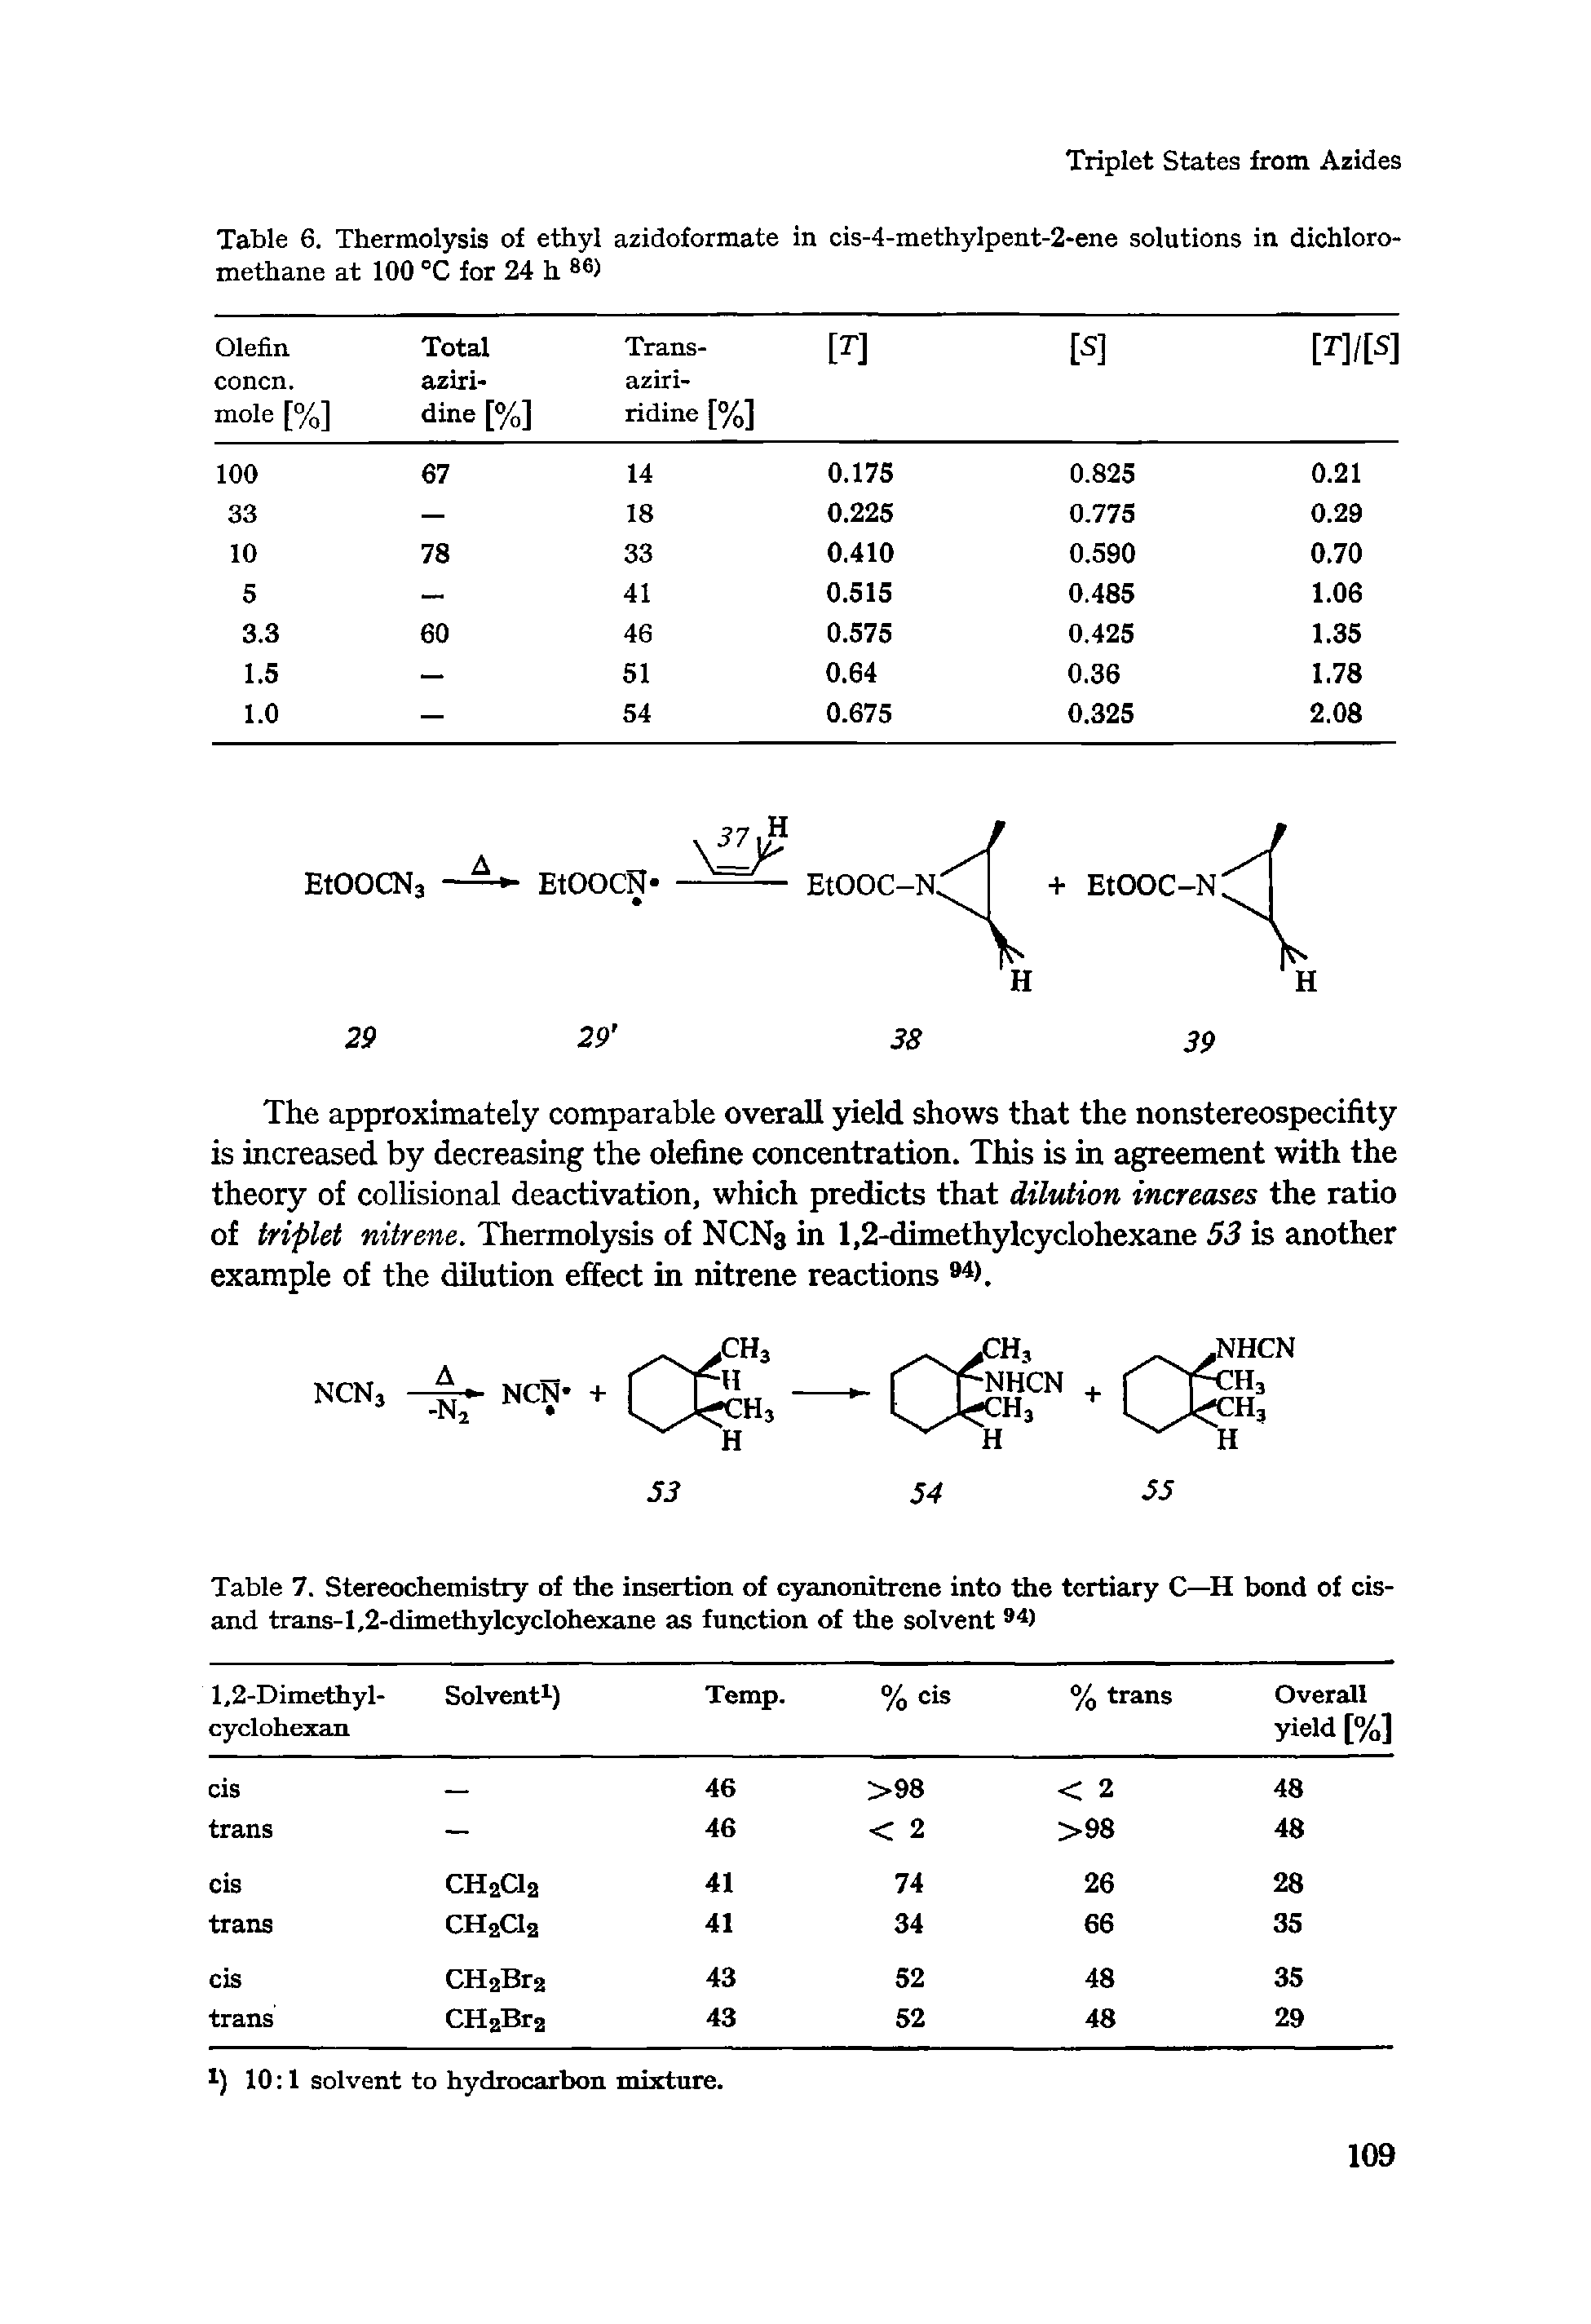 Table 7. Stereochemistry of the insertion of cyanonitrene into the tertiary C—H bond of cis-and trans-l,2-dimethylcycIohexane as function of the solvent 94>...